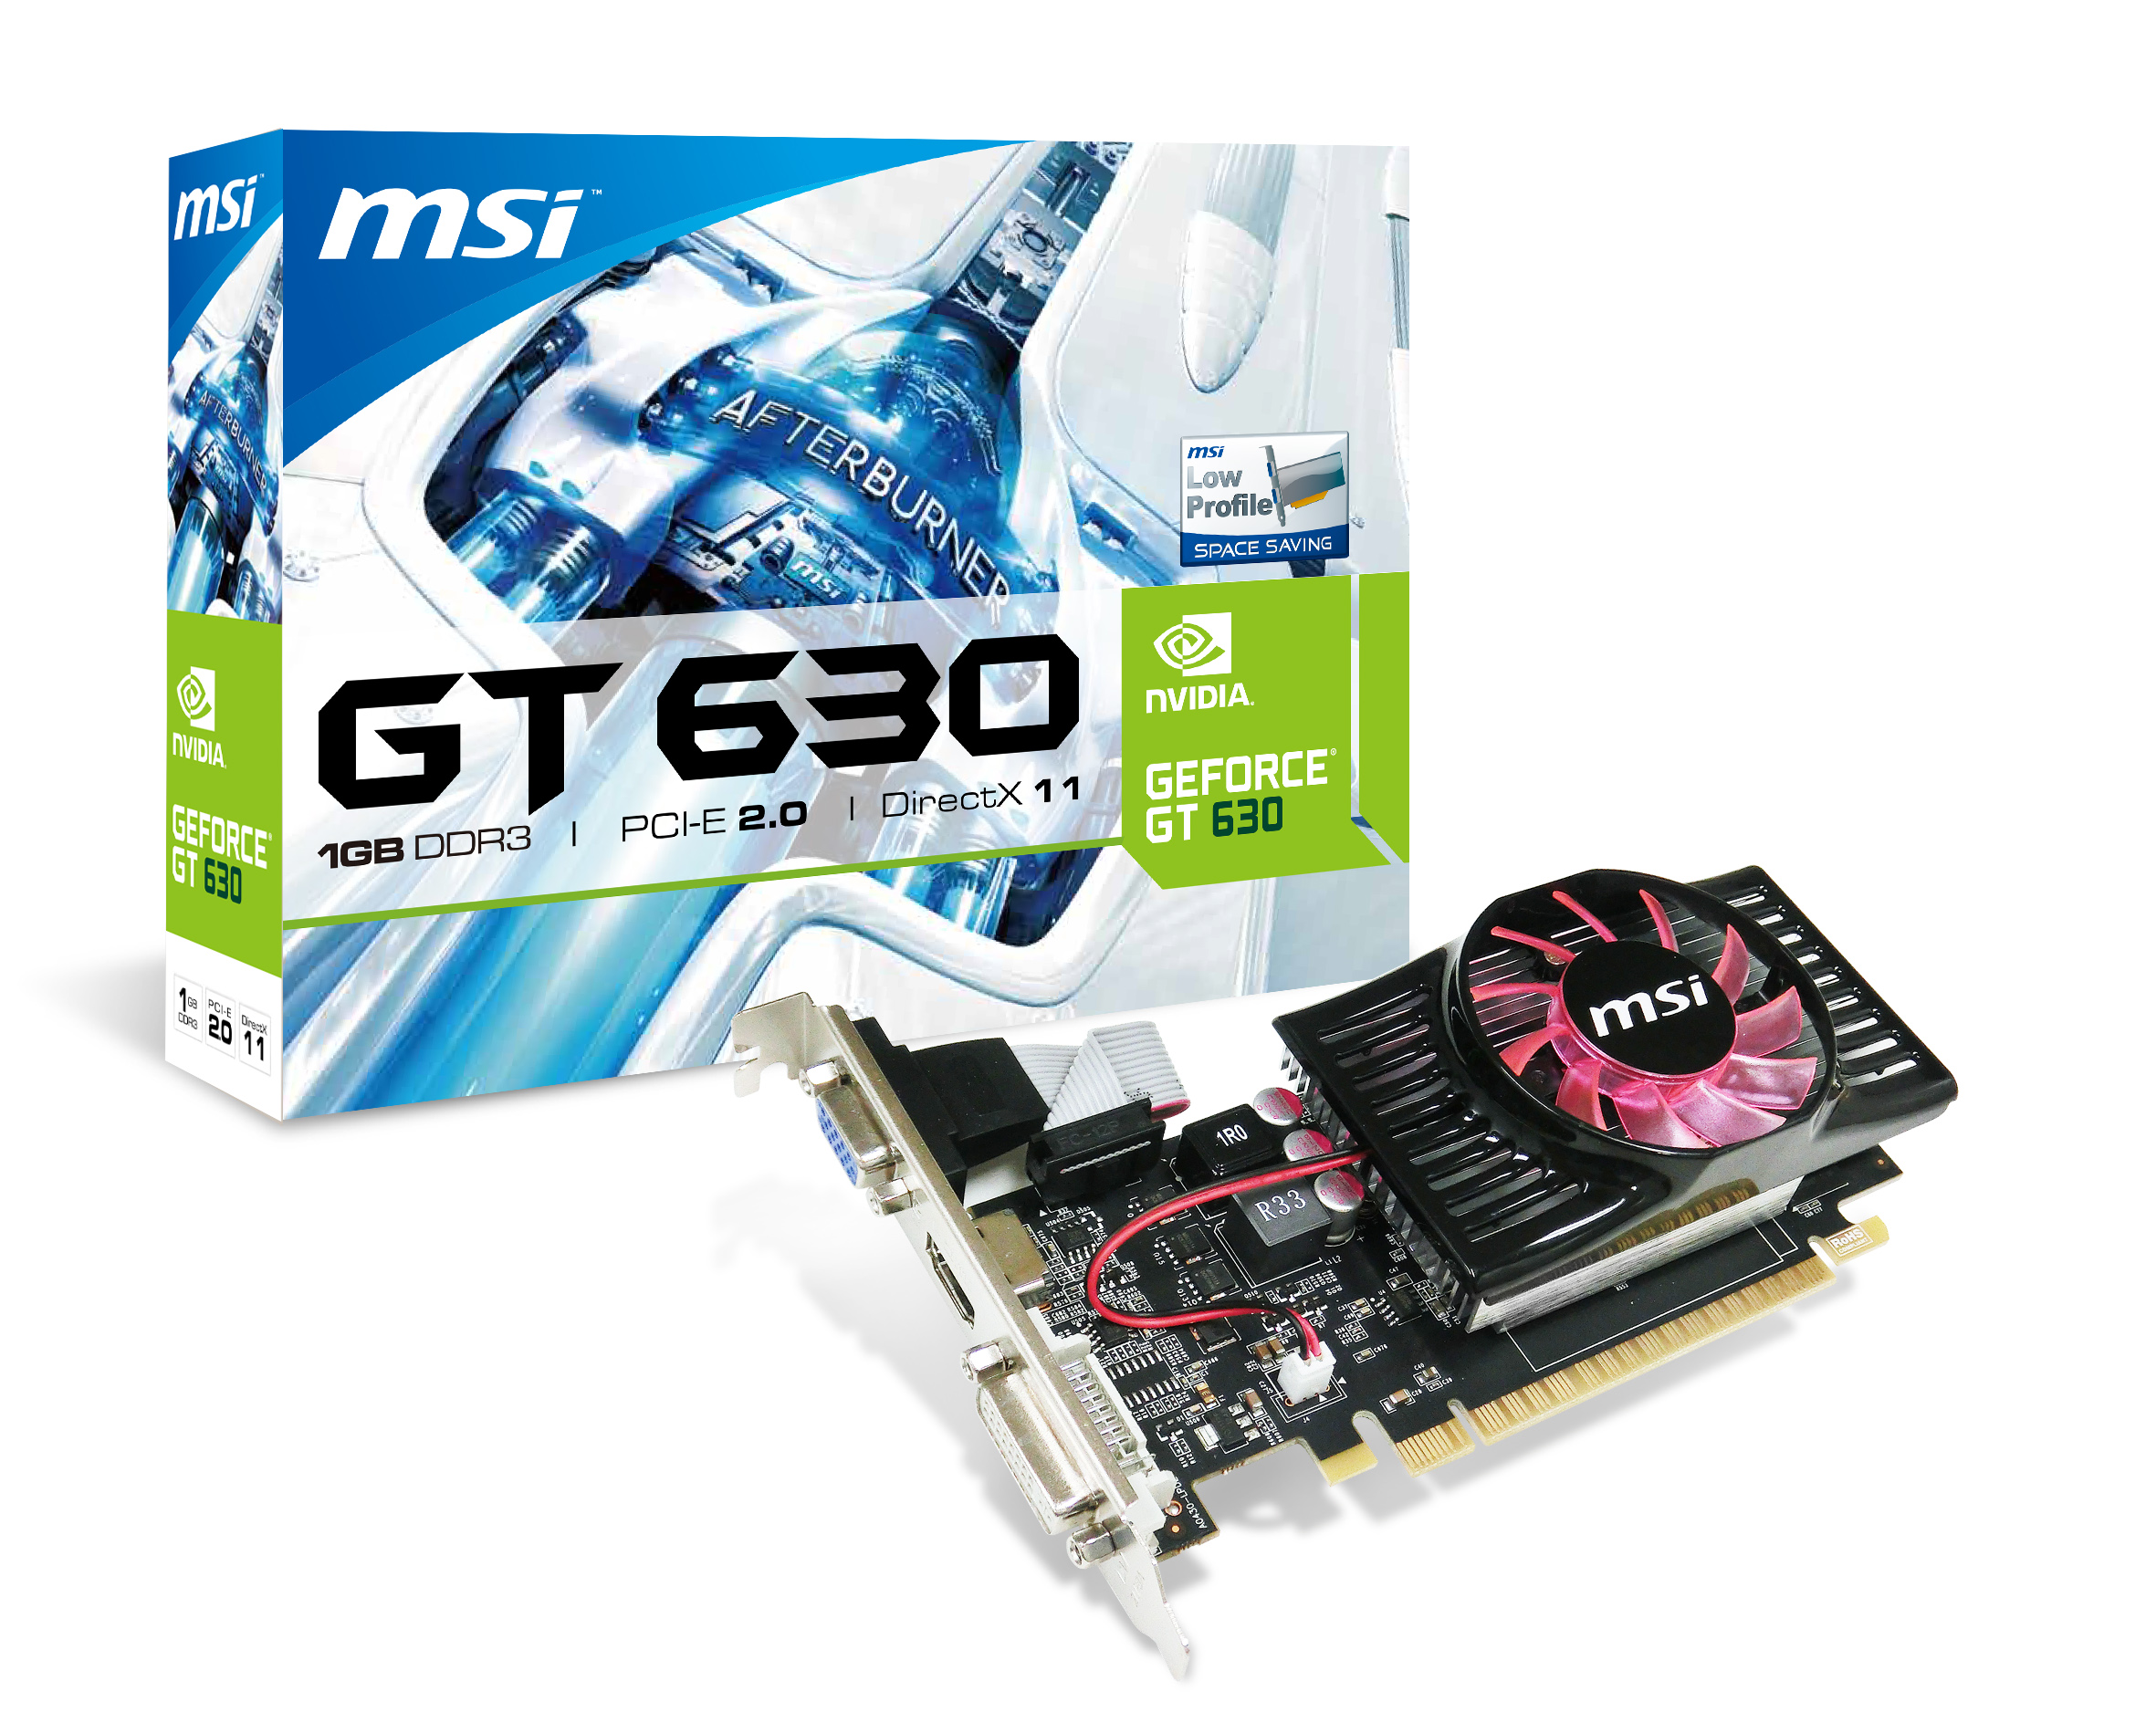 Media asset in full size related to 3dfxzone.it news item entitled as follows: MSI commercializza la video card GeForce GT 630 low-profile | Image Name: news19651_MSI-GeForce-GT-630-low-profile_3.jpg